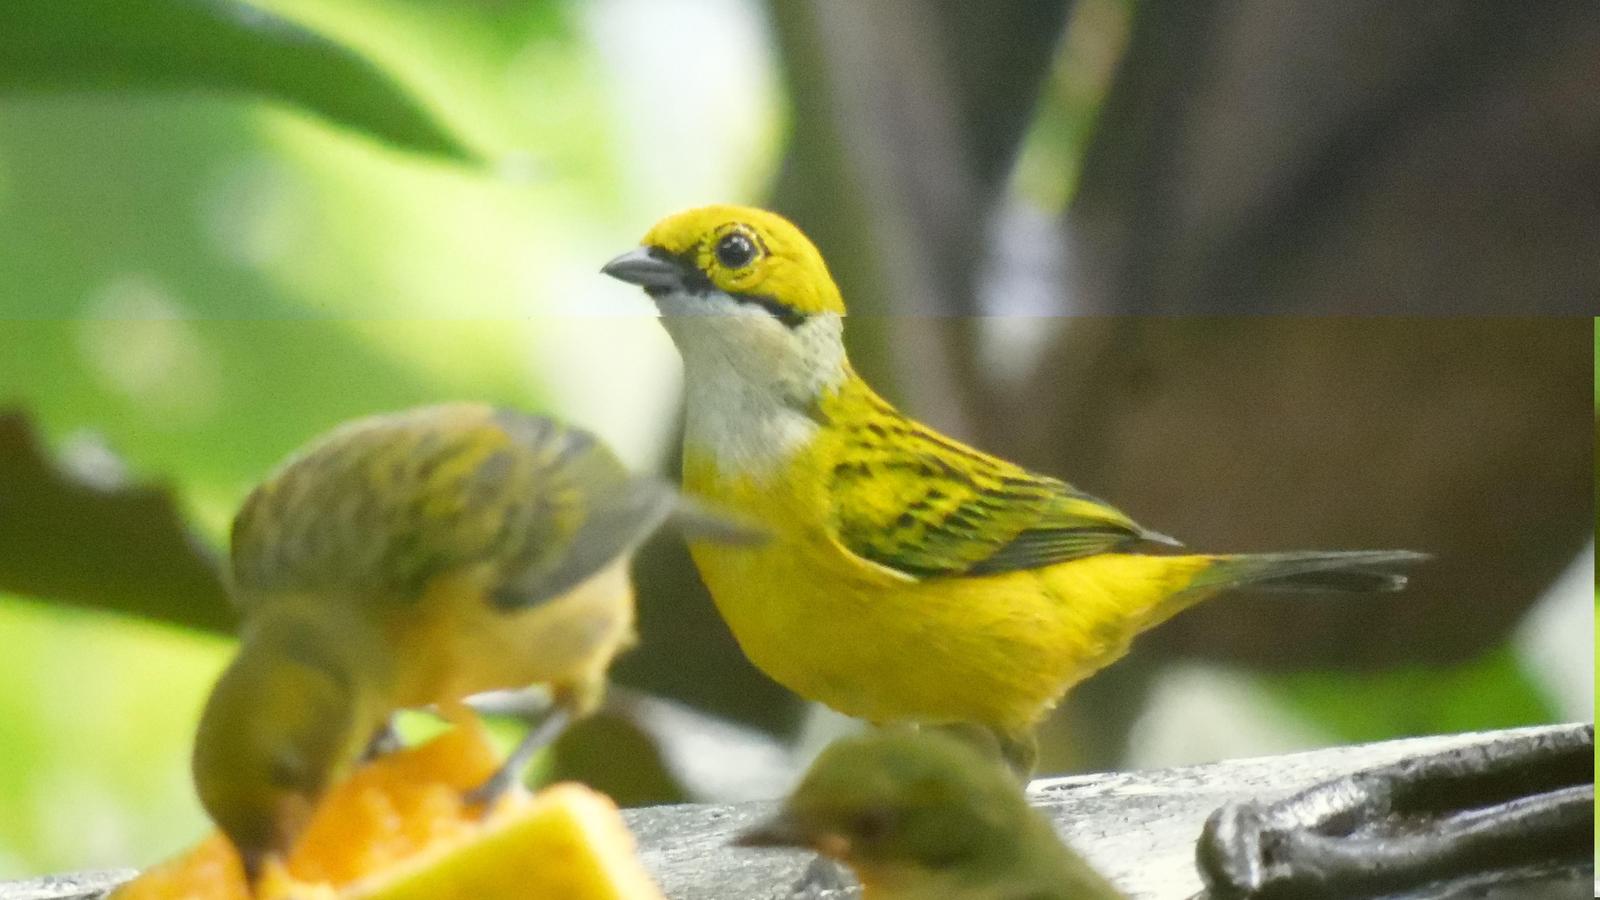 Silver-throated Tanager Photo by Julio Delgado